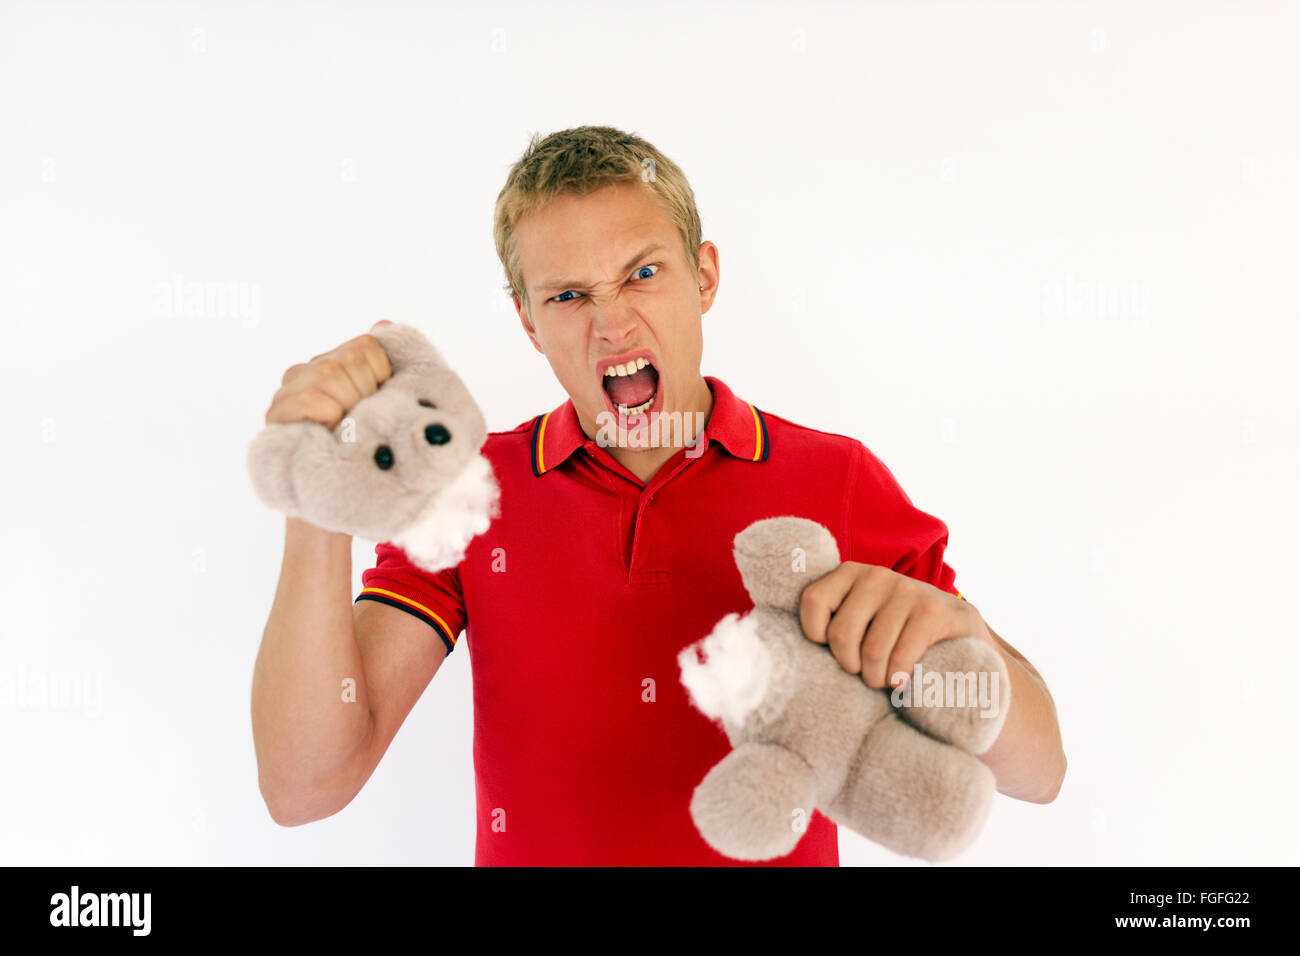 Man ripping the head off a cute cuddly toy teddy bear screaming in a moment of anger Stock Photo